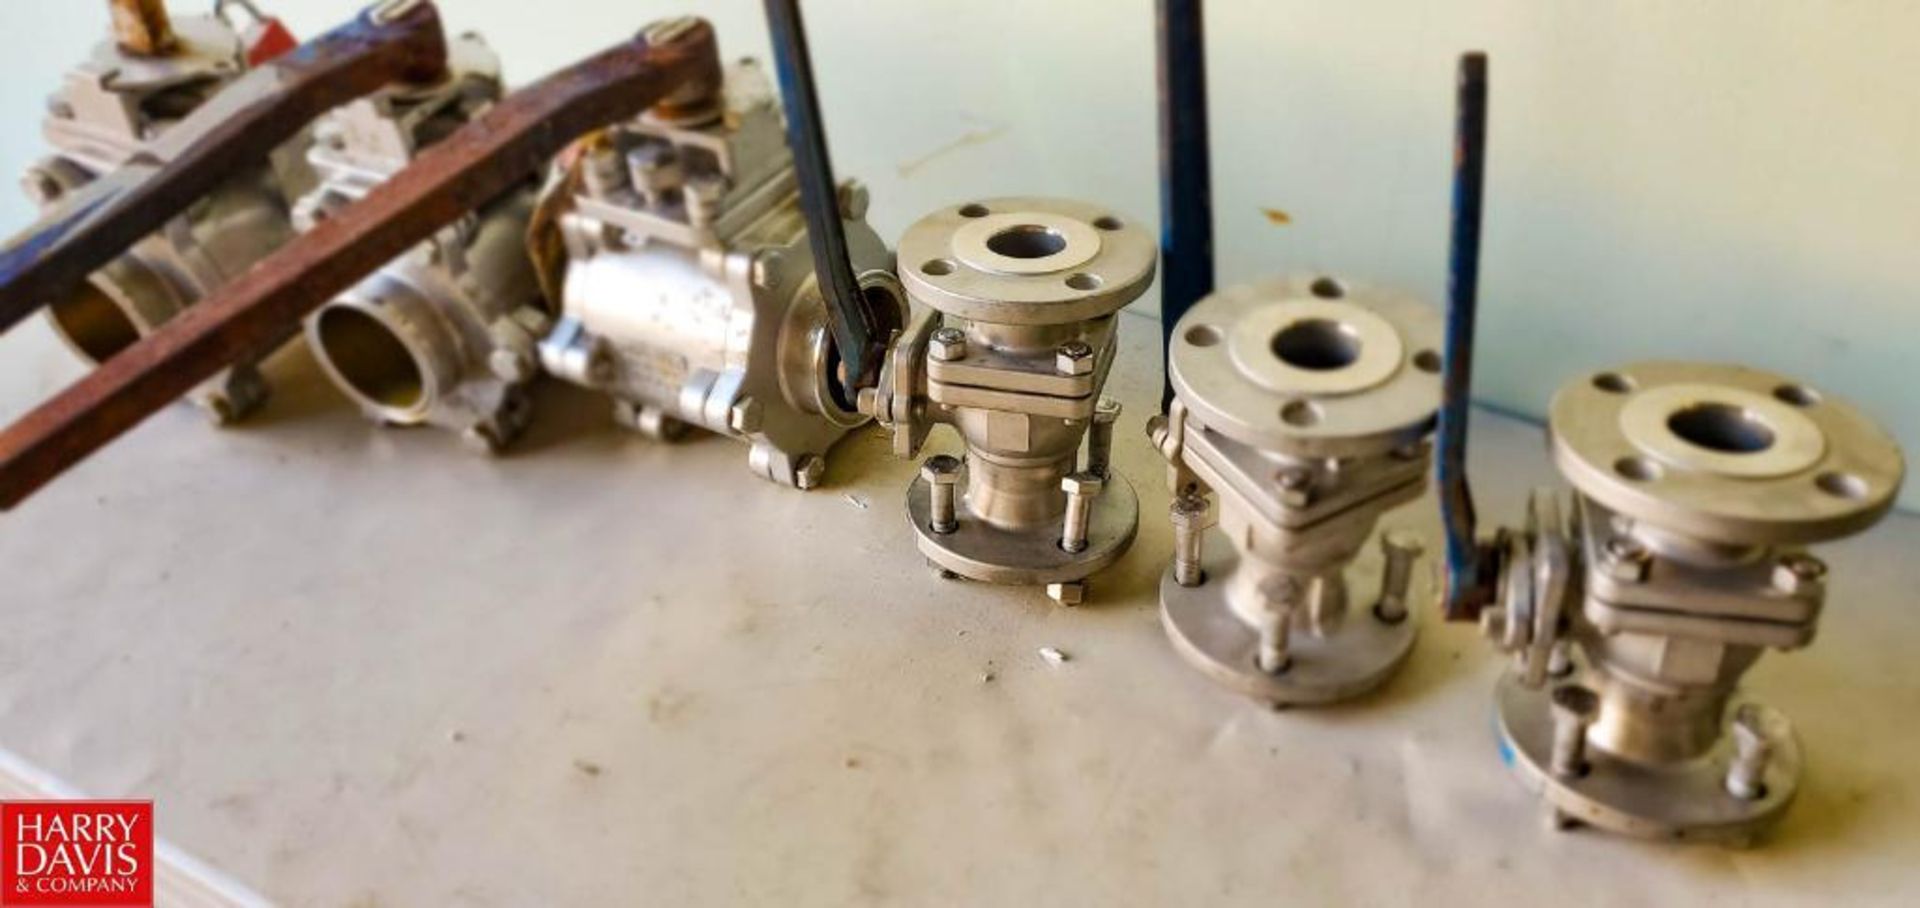 (6) Assorted 1.5" and 3" S/S Ball Valves, Flanged-Type (Location: Miami, FL) - Rigging Fee: $25